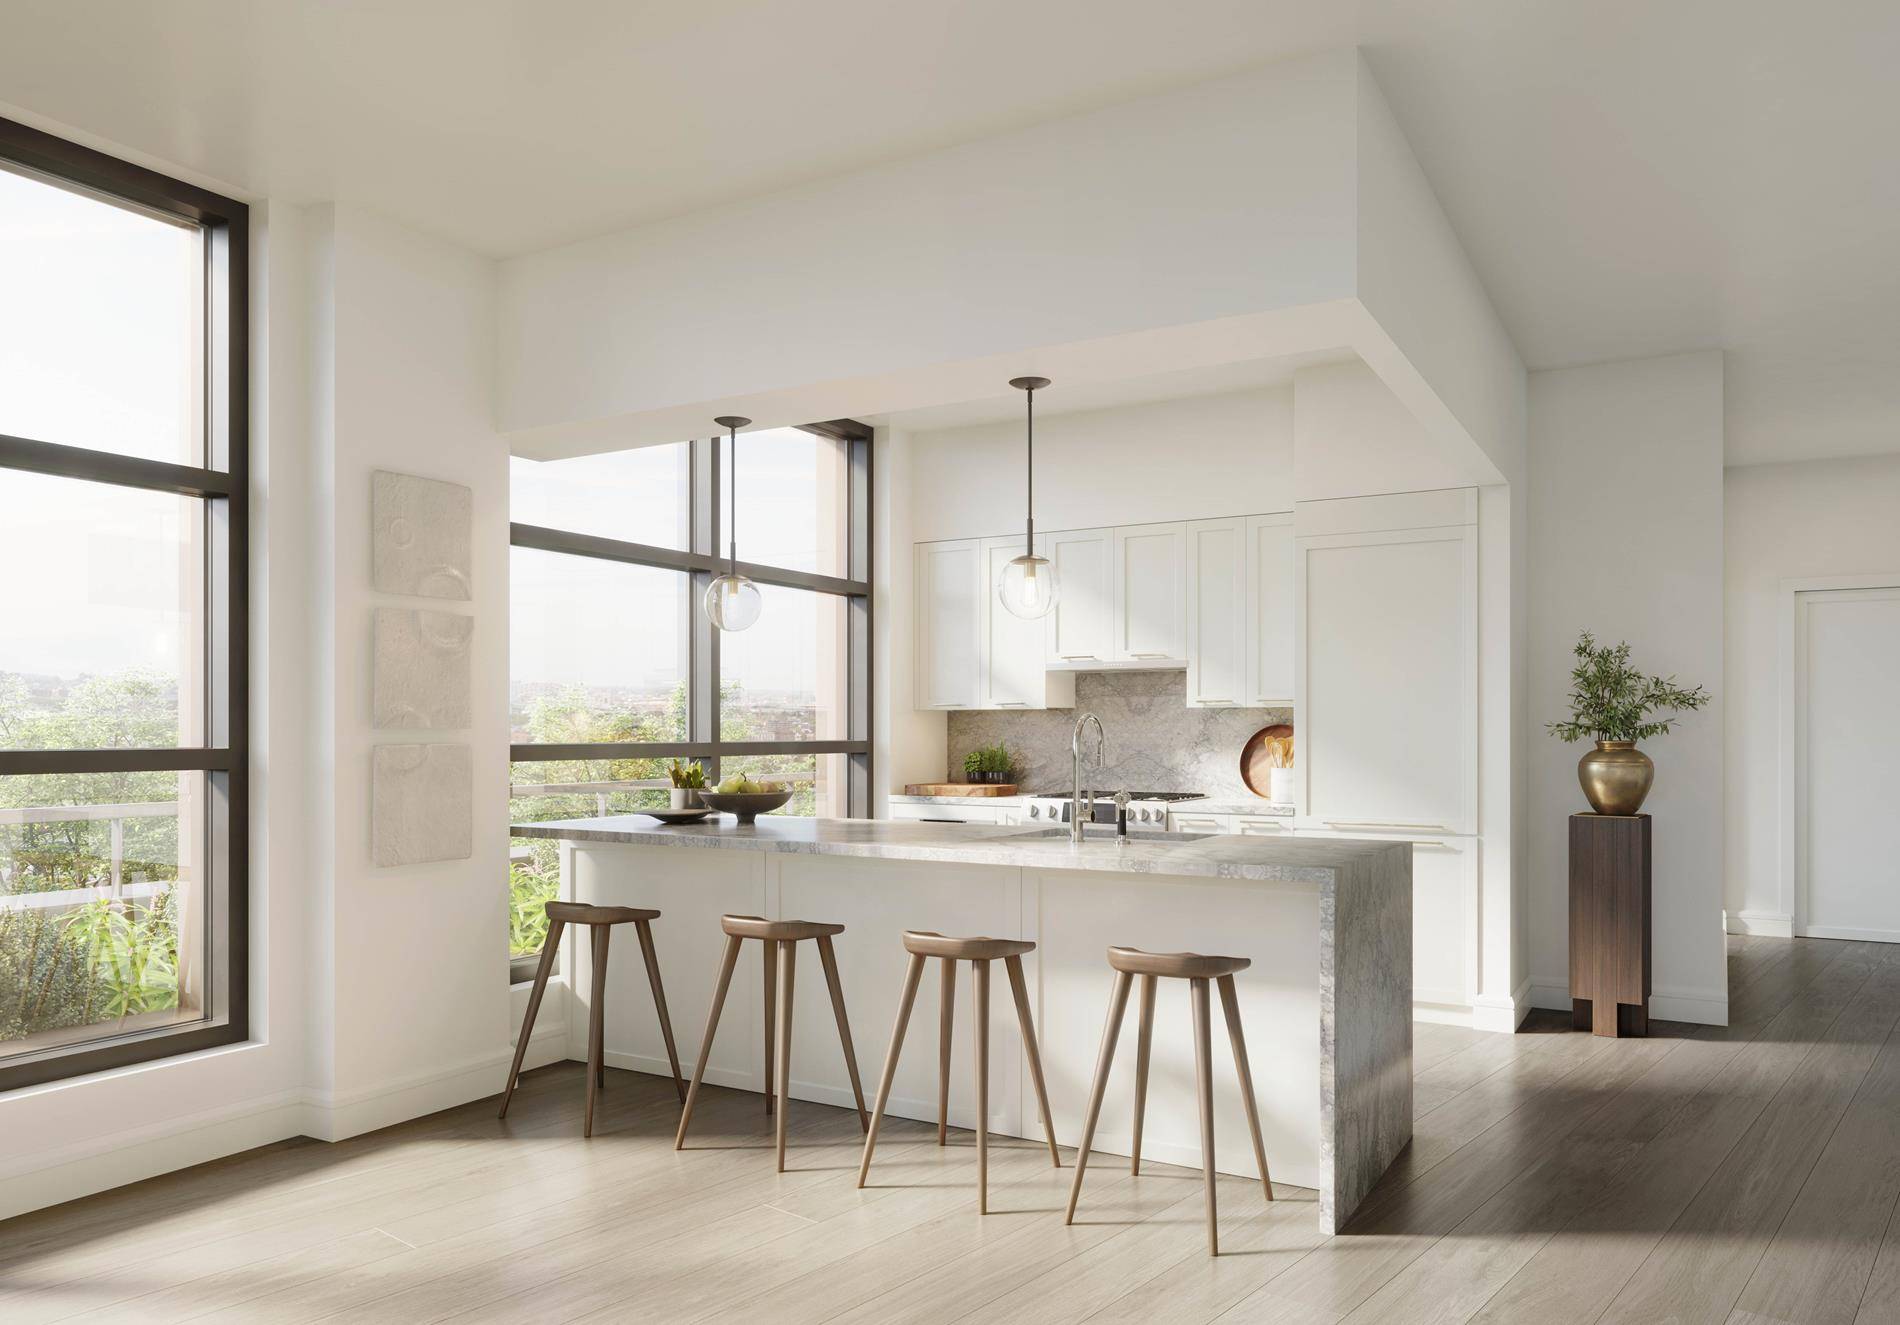 Introducing Residence 9H at BLVD, a stunning two bedroom, two bathroom condominium with balcony that offers an unparalleled living experience in the heart of Forest Hills.